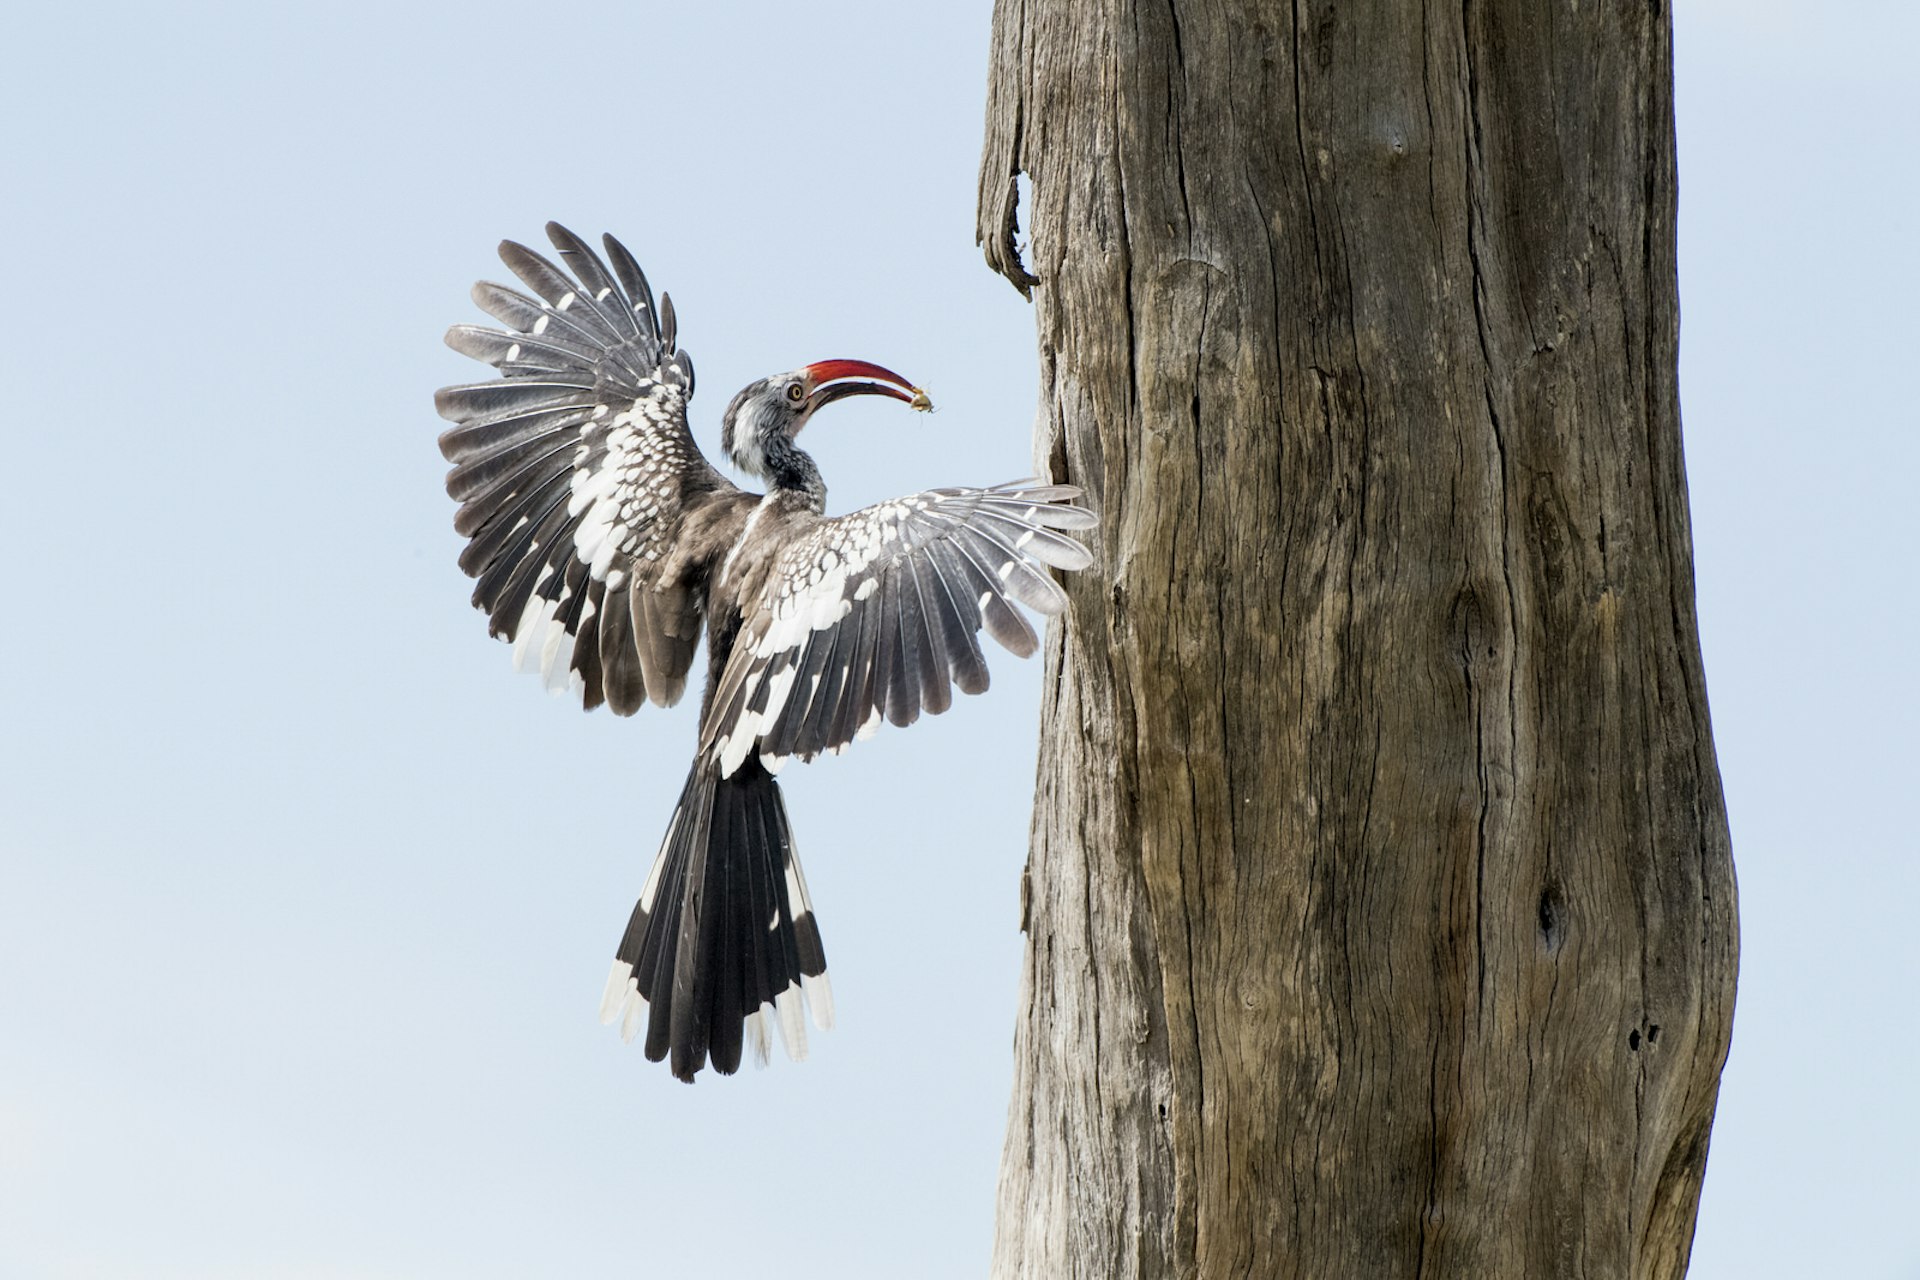 With wings raised open the red-billed hornbill flies up to a tree with a small insect in its mouth; this bird was the character Zazu in 'The Lion King'